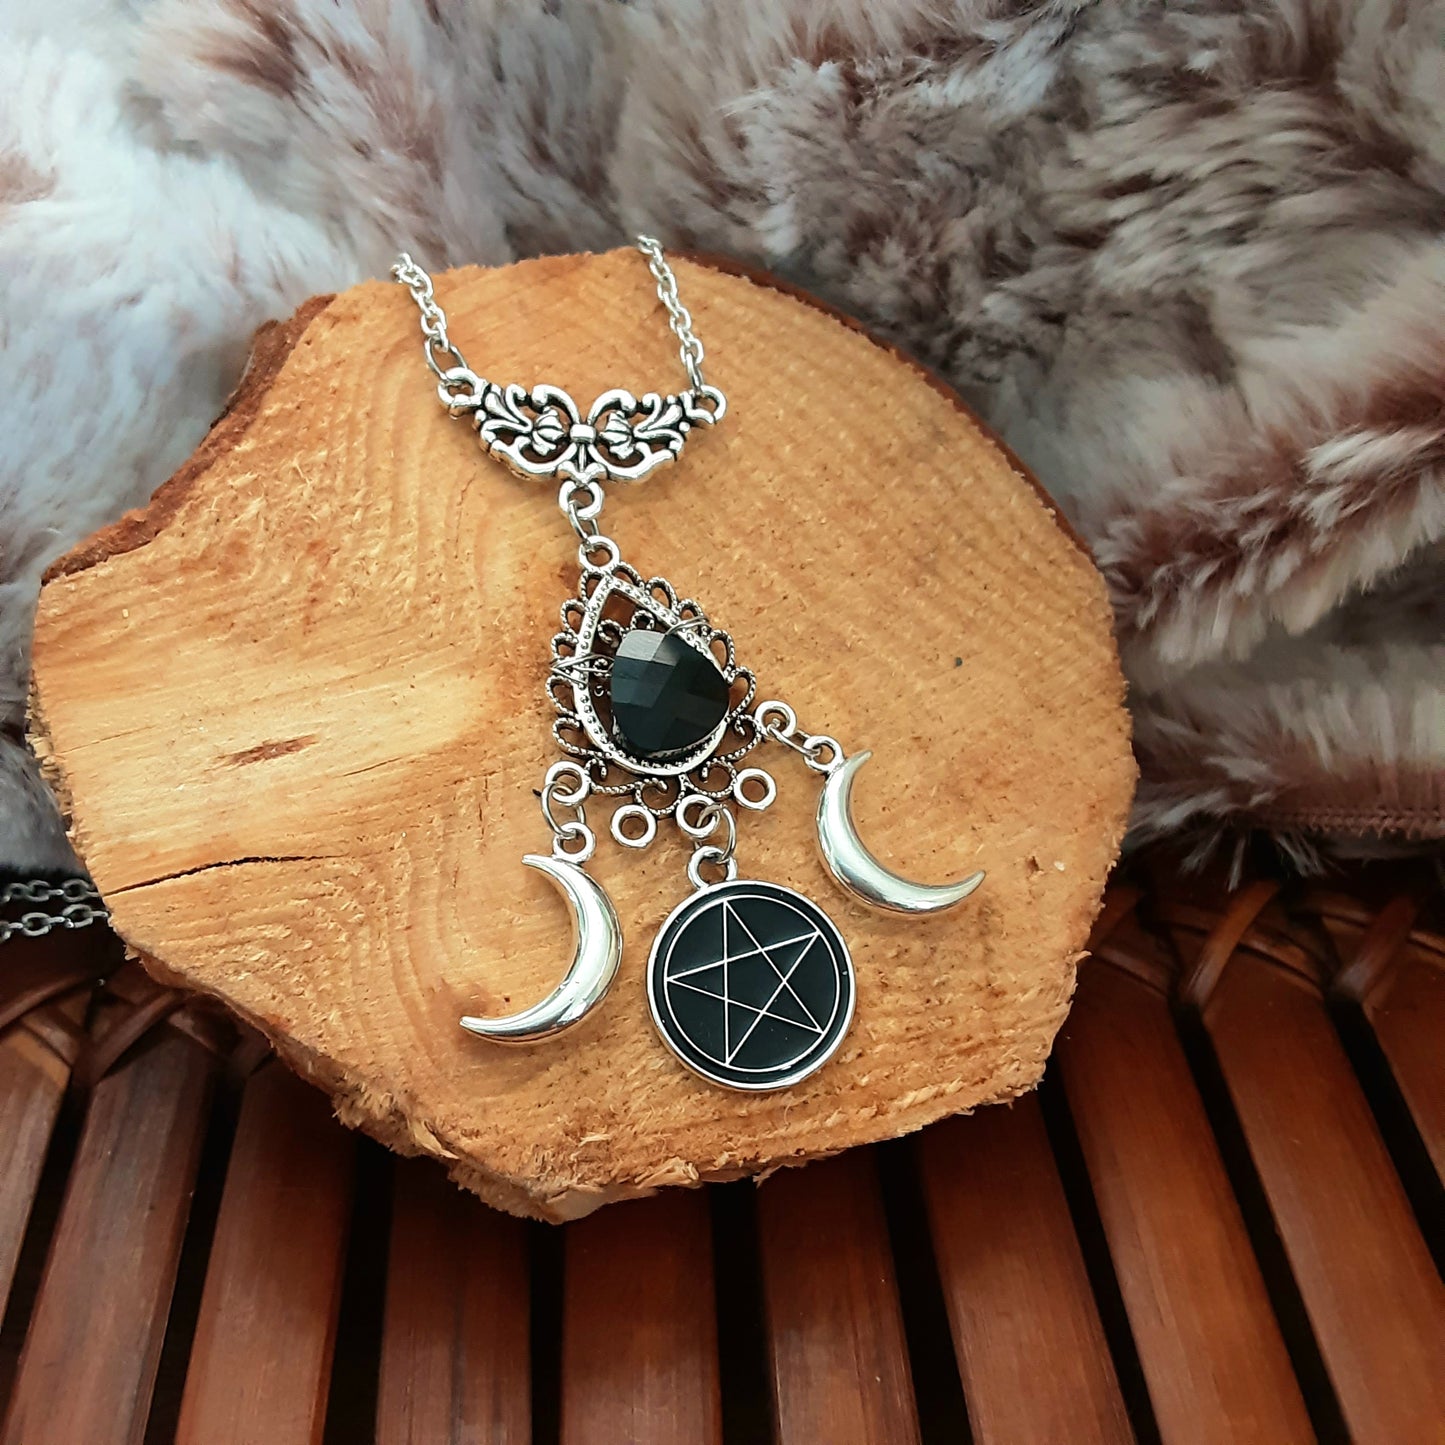 Witch necklace with pentacle and crescent moons